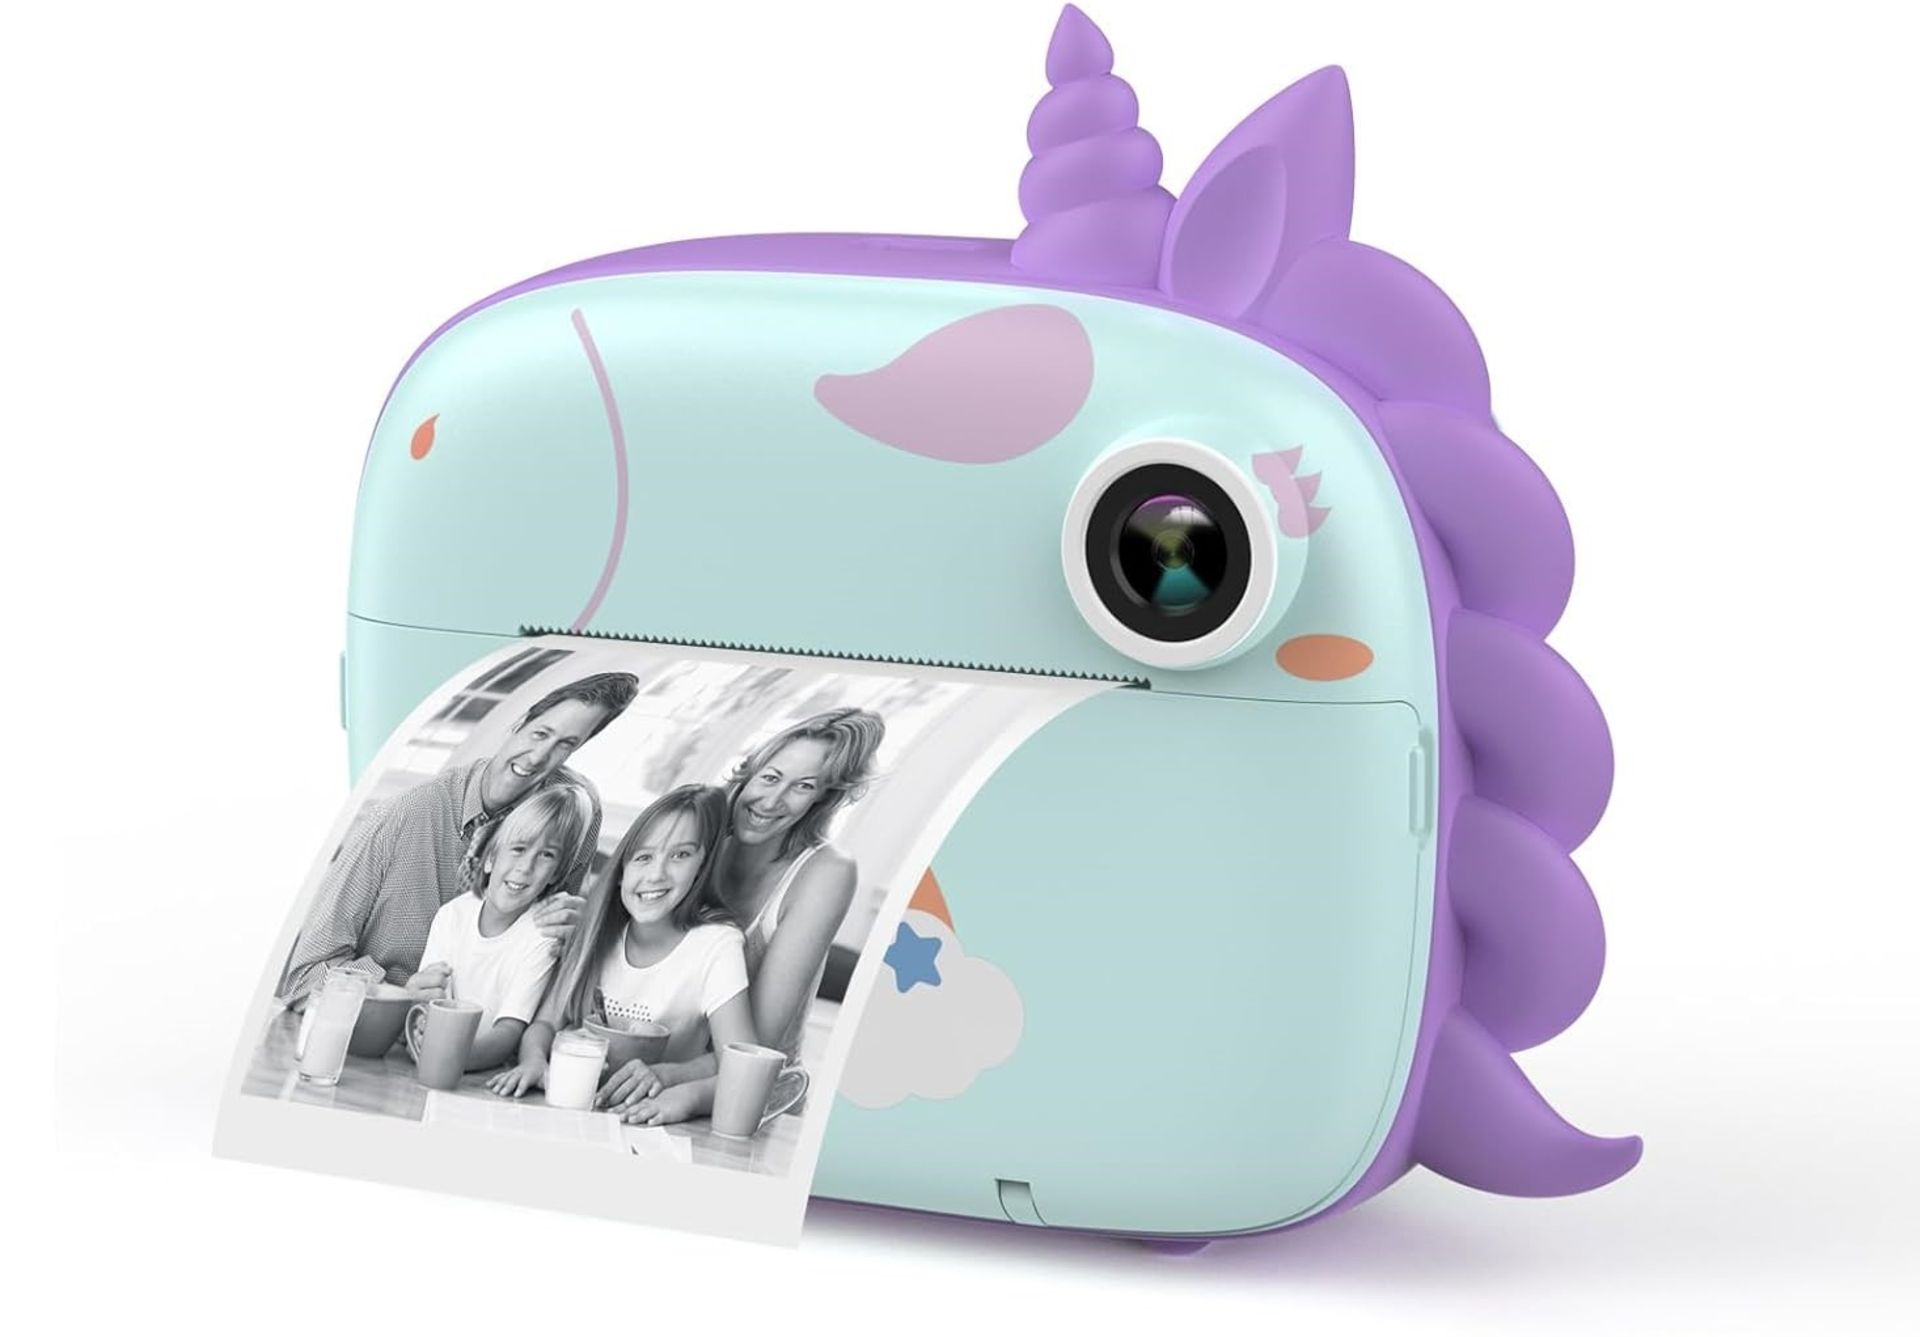 RRP £400 Lot of 10 x HiMont Kids Camera Instant Print, Digital Camera for Kids with No Ink Print